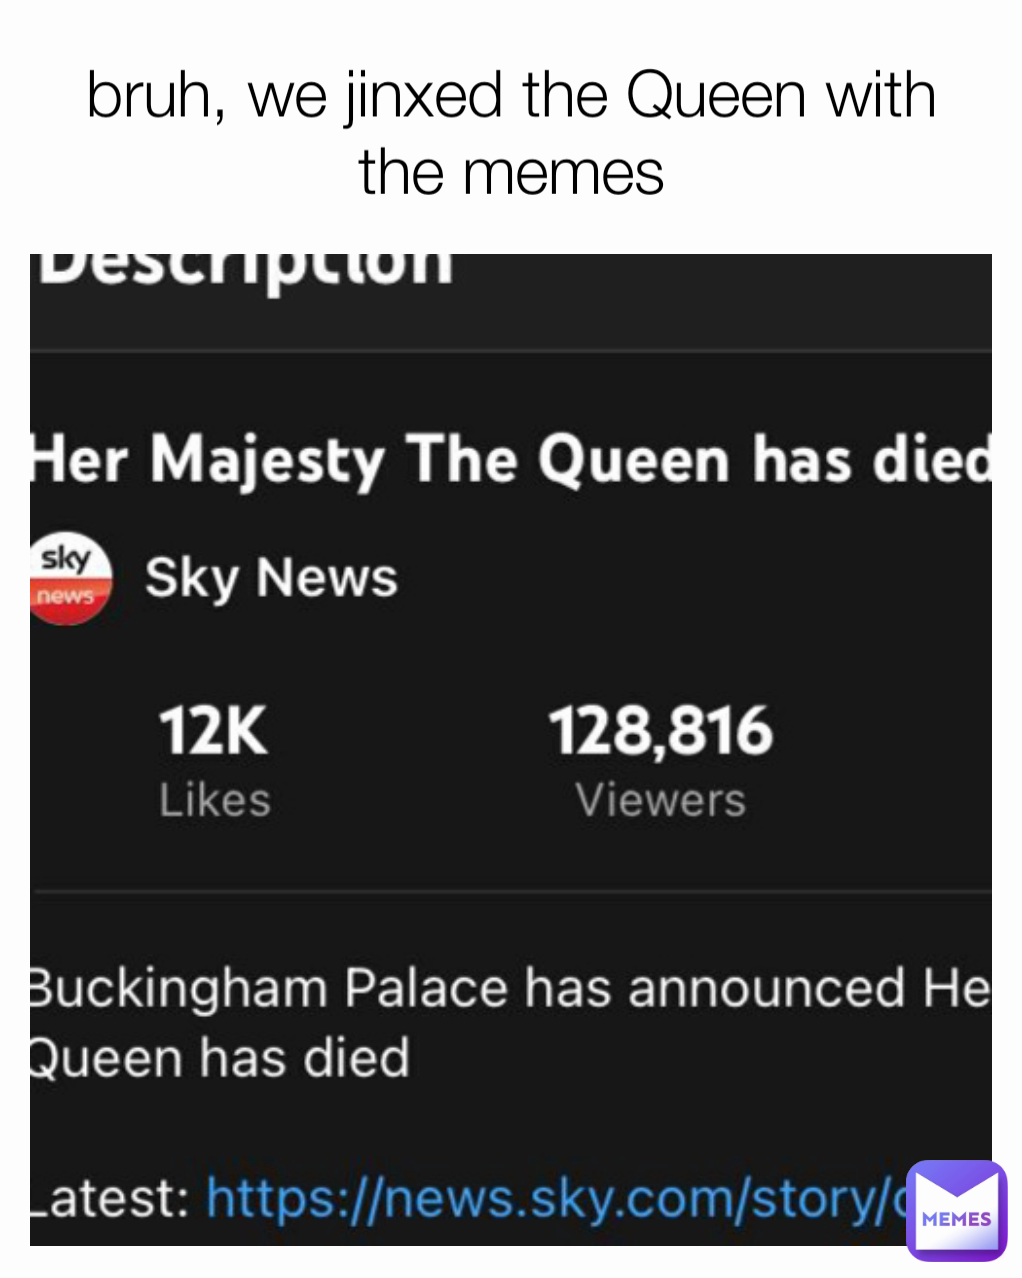 bruh, we jinxed the Queen with the memes